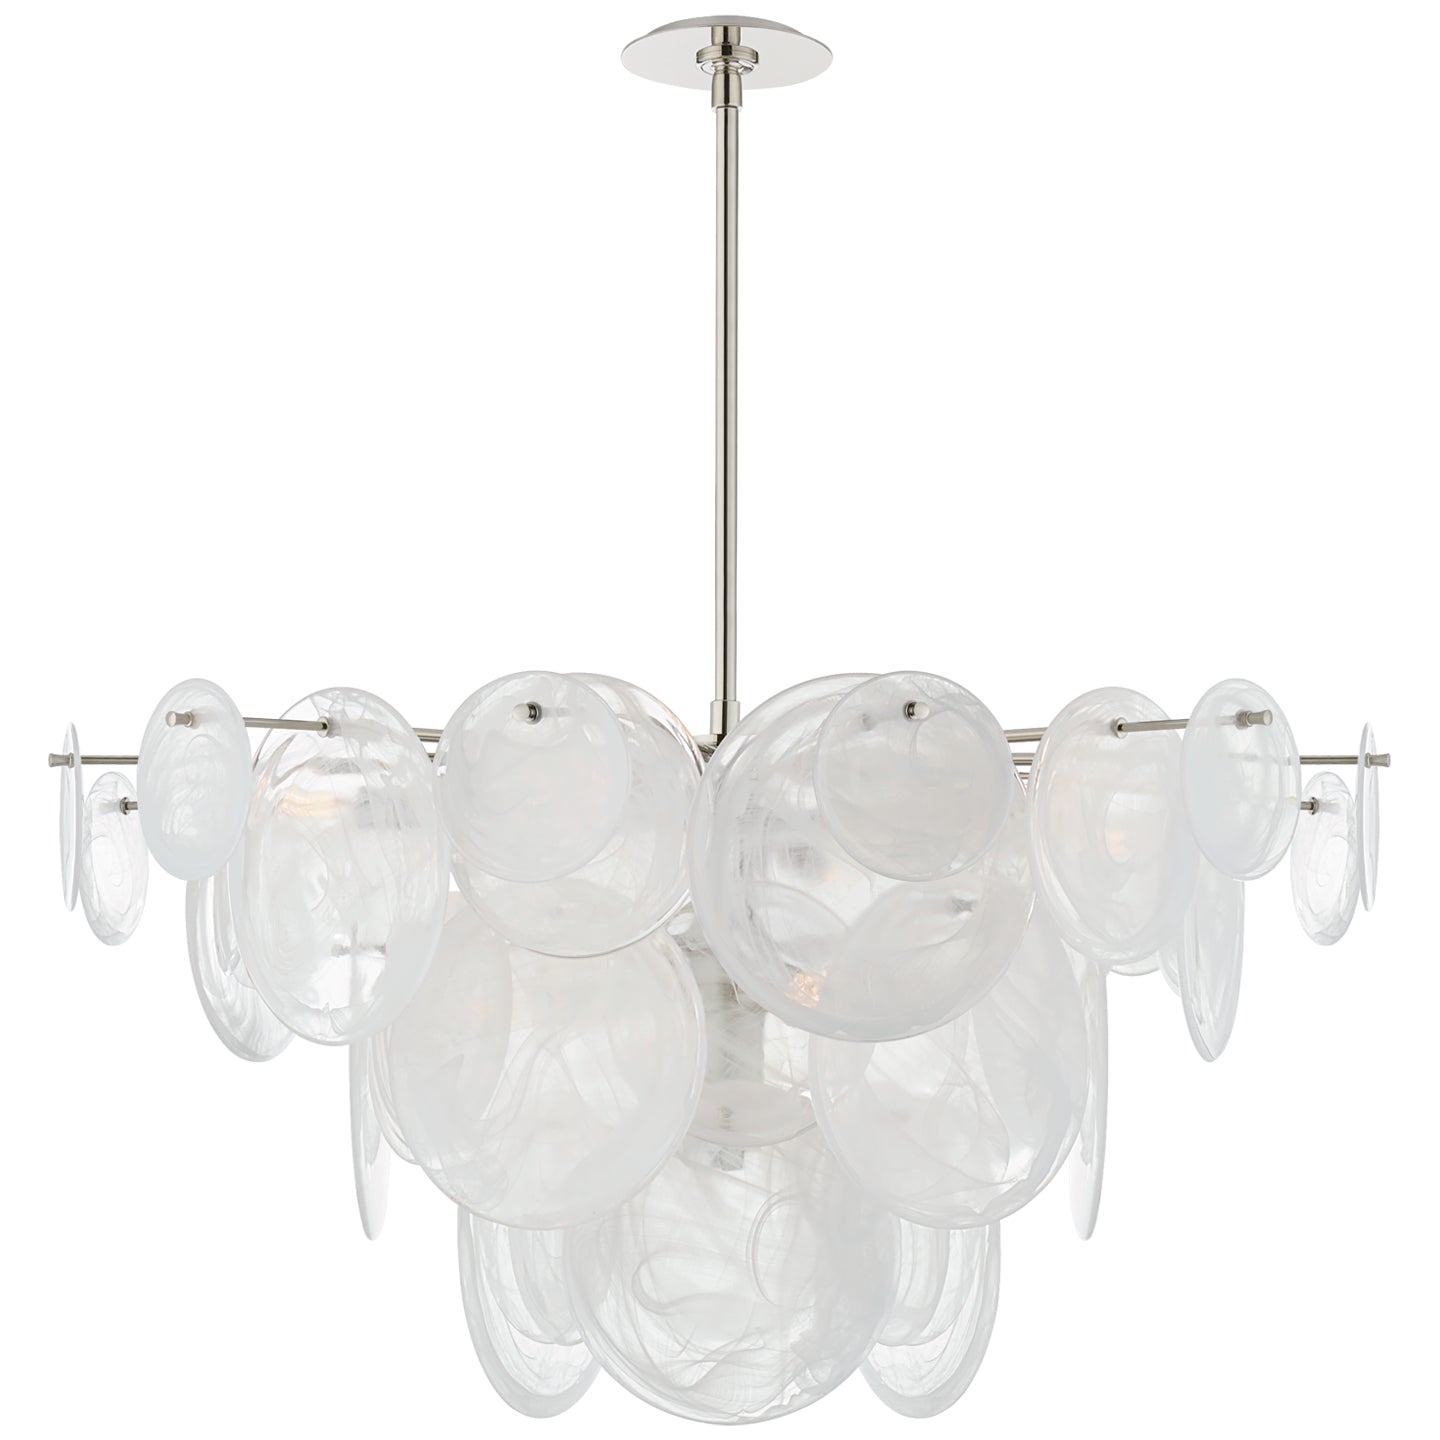 Load image into Gallery viewer, Visual Comfort Signature - ARN 5450PN-WSG - Nine Light Chandelier - Loire - Polished Nickel
